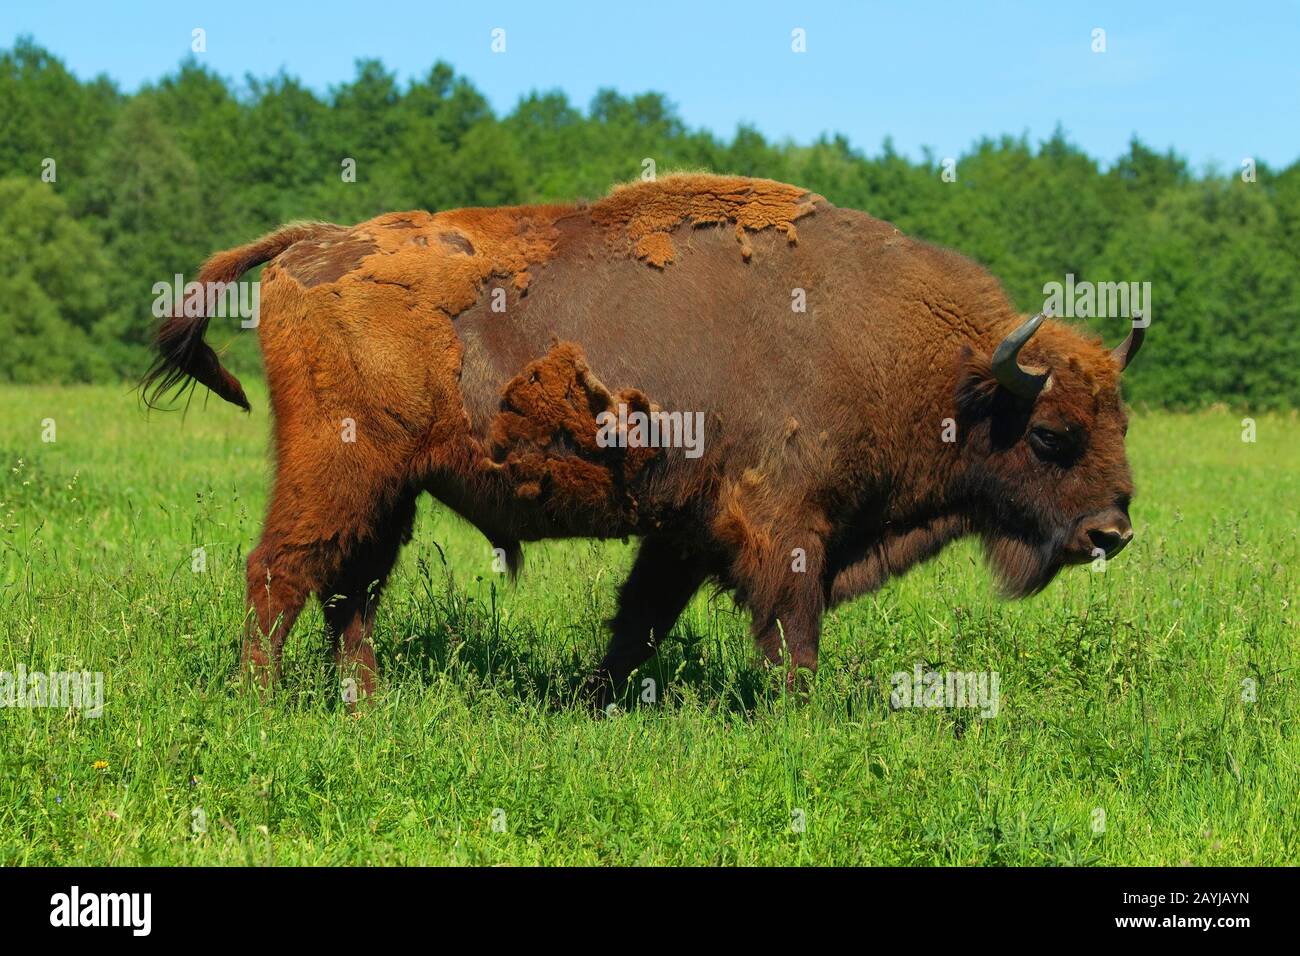 European bison, wisent (Bison bonasus), stands in a meadow, Germany Stock Photo